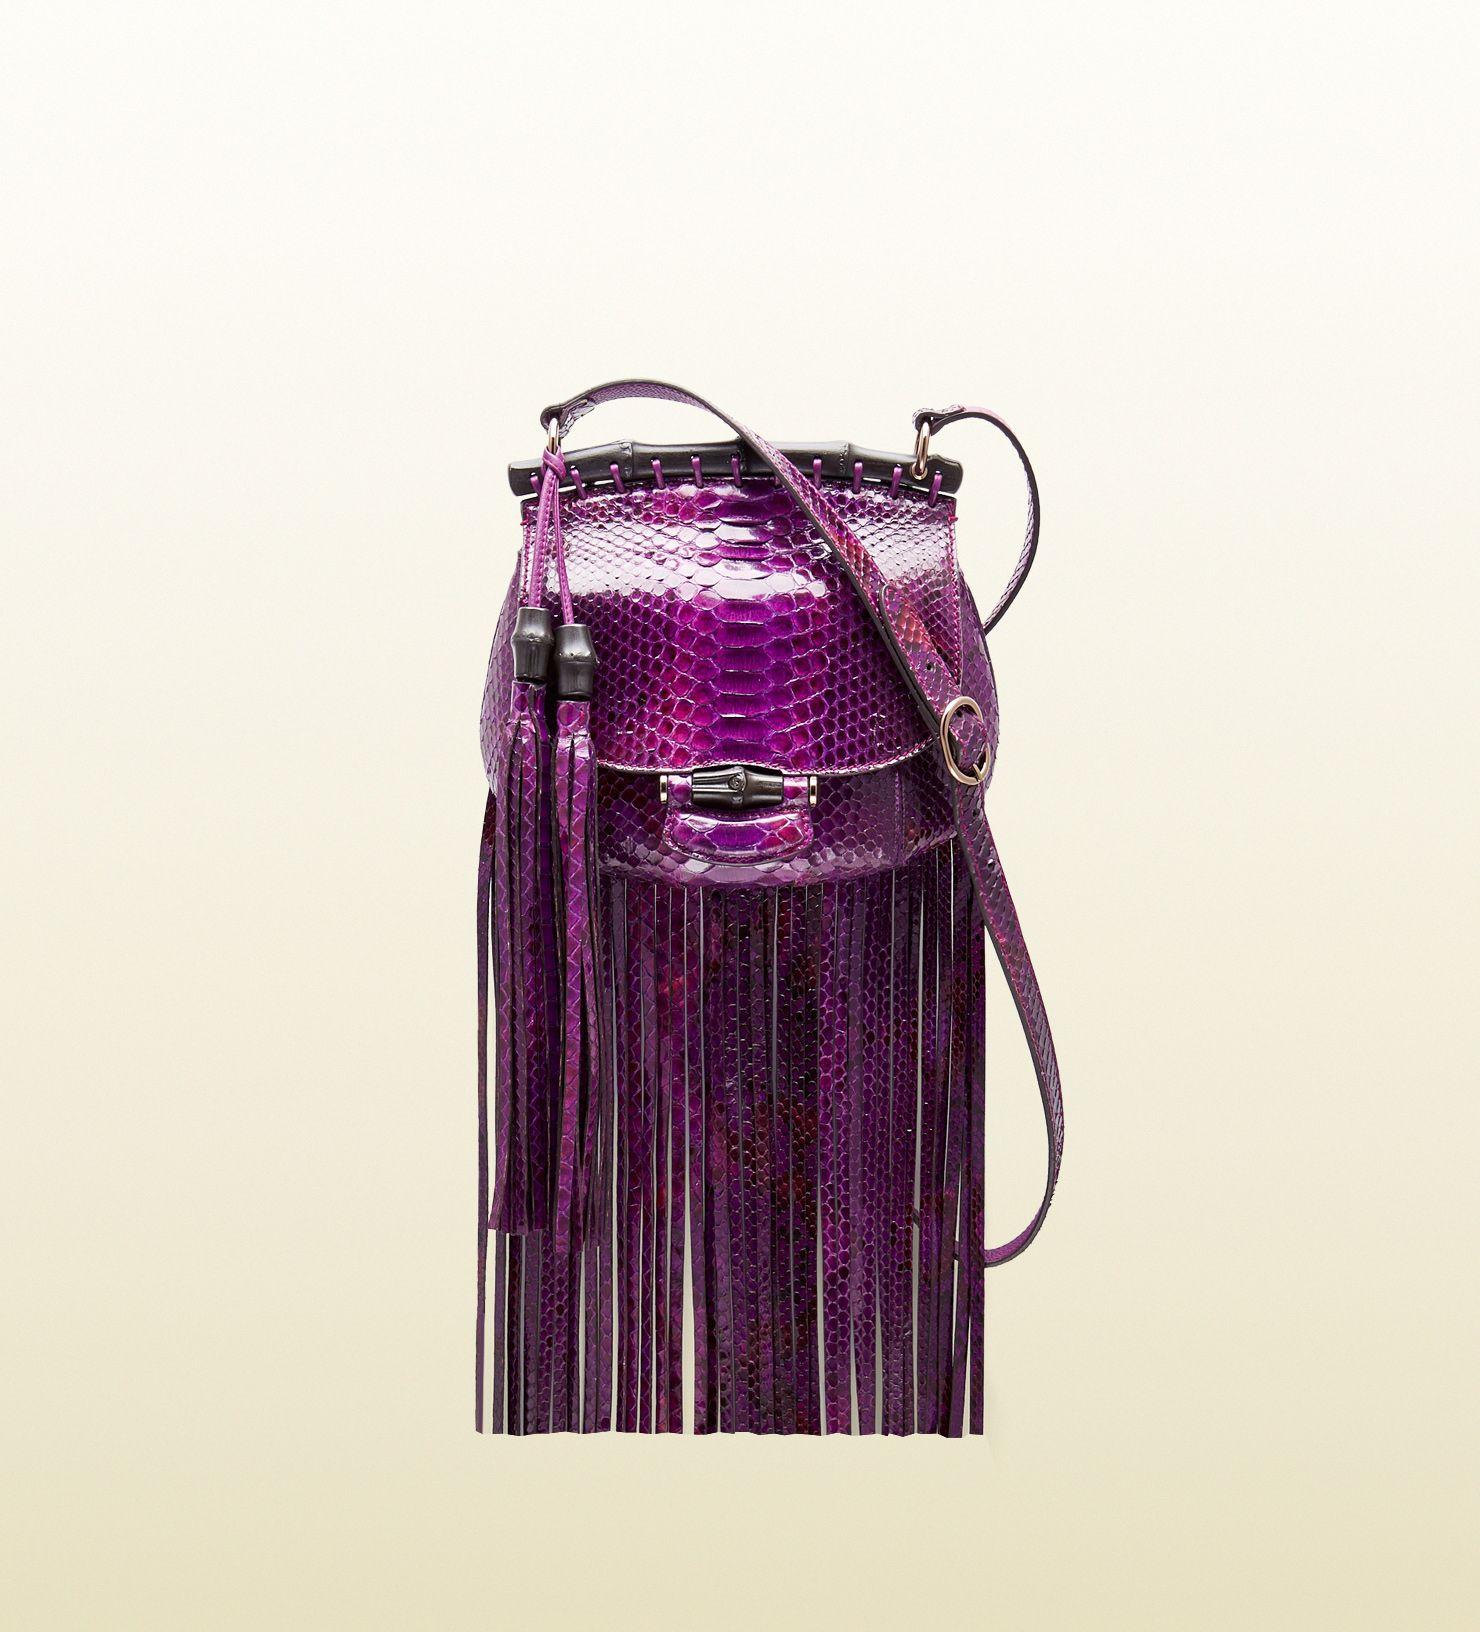 New Gucci Nouveau Python Fringe Bamboo Runway Bag in Plum $3100 4